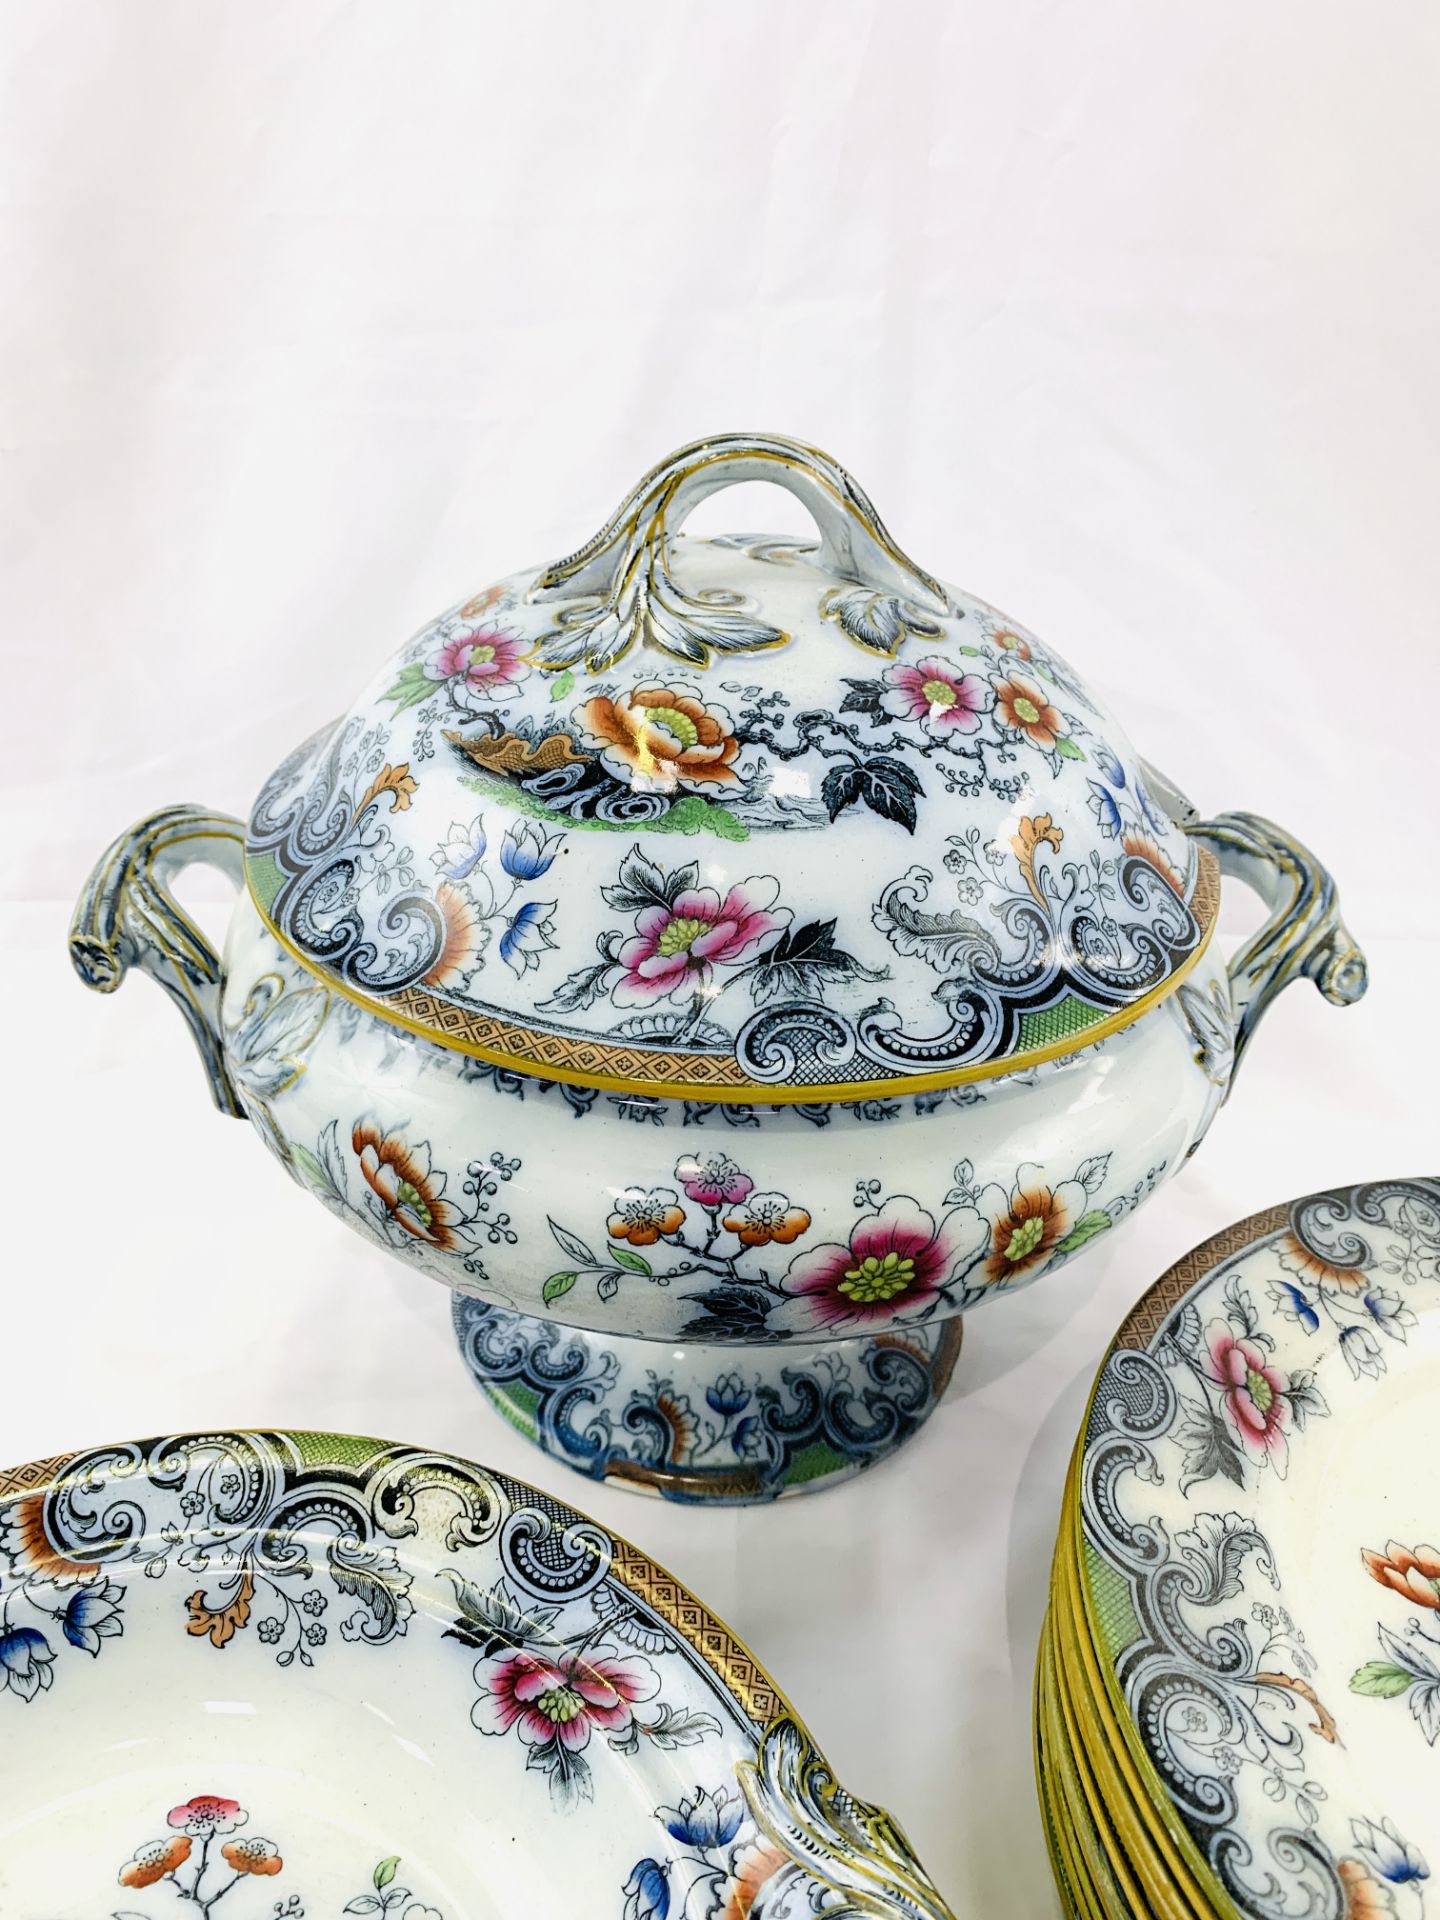 JR and G "Floral" tableware - Image 2 of 4